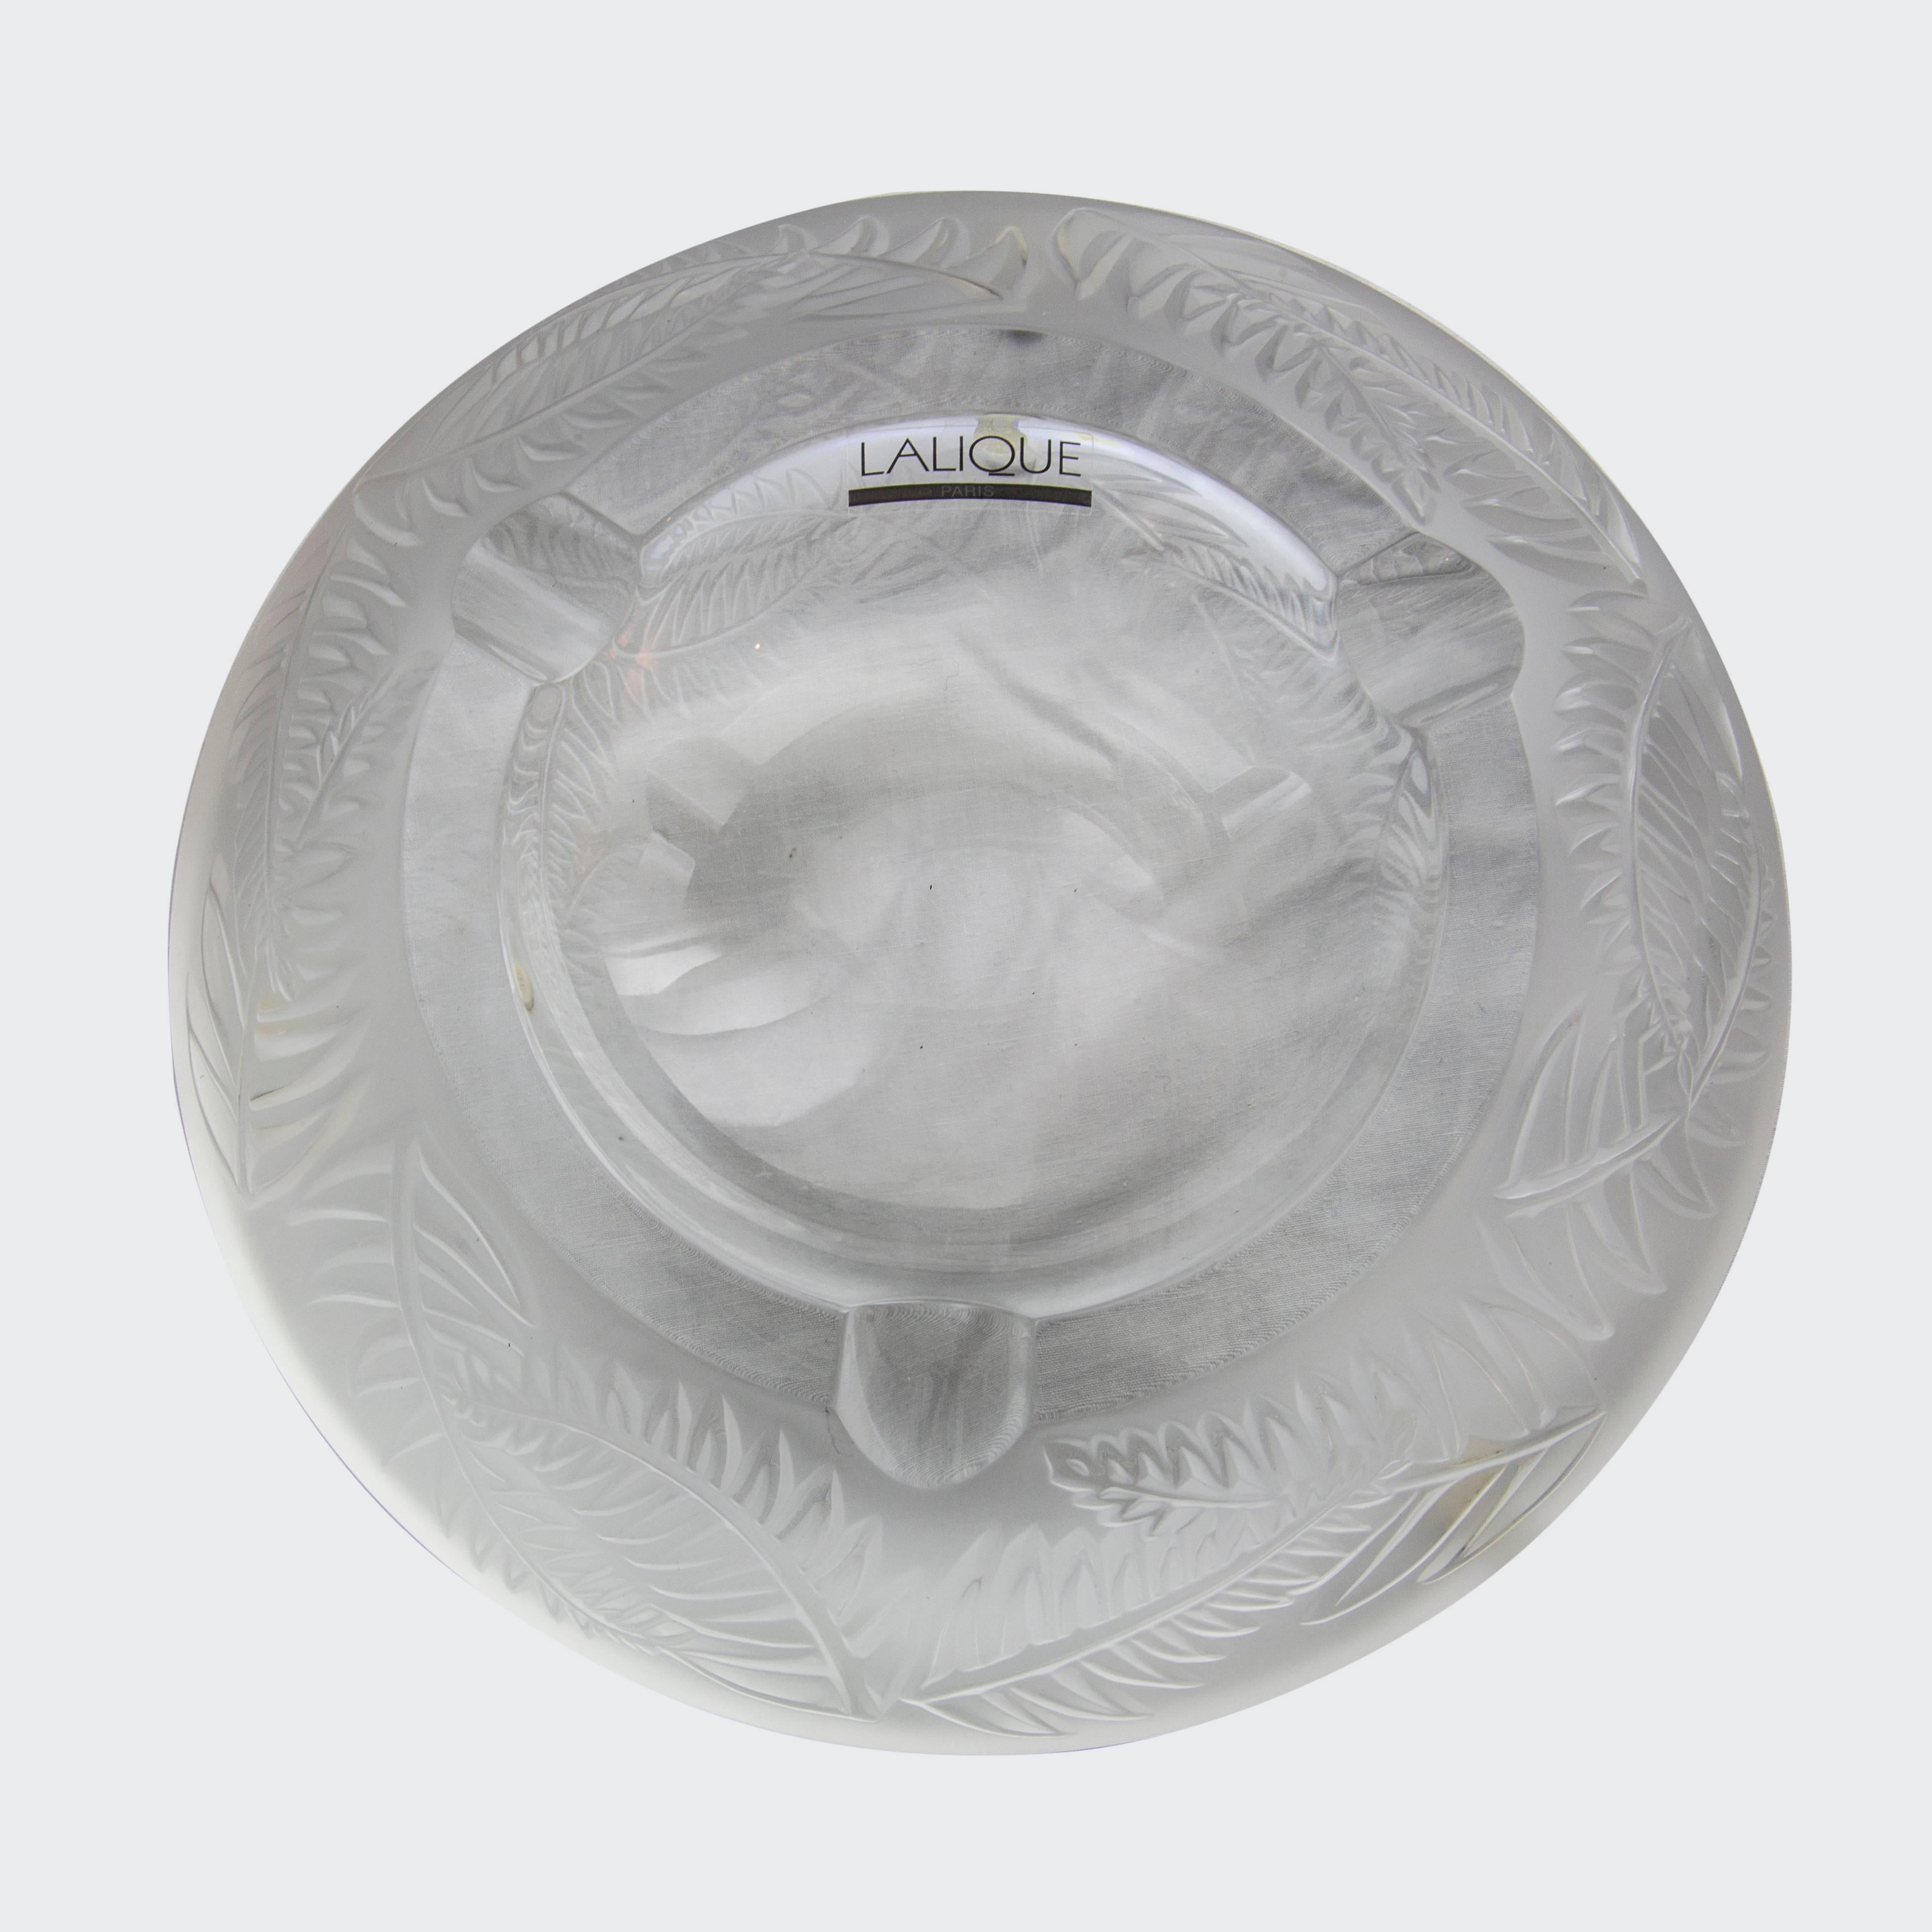 Large Lalique frosted crystal ashtray, entitled Fougères, encircled with raised fern leaf design. Designed in 2001, now retired, can be used as a bowl; this heavy ashtray is a real beauty; signed Lalique France in script to base, and Lalique Paris